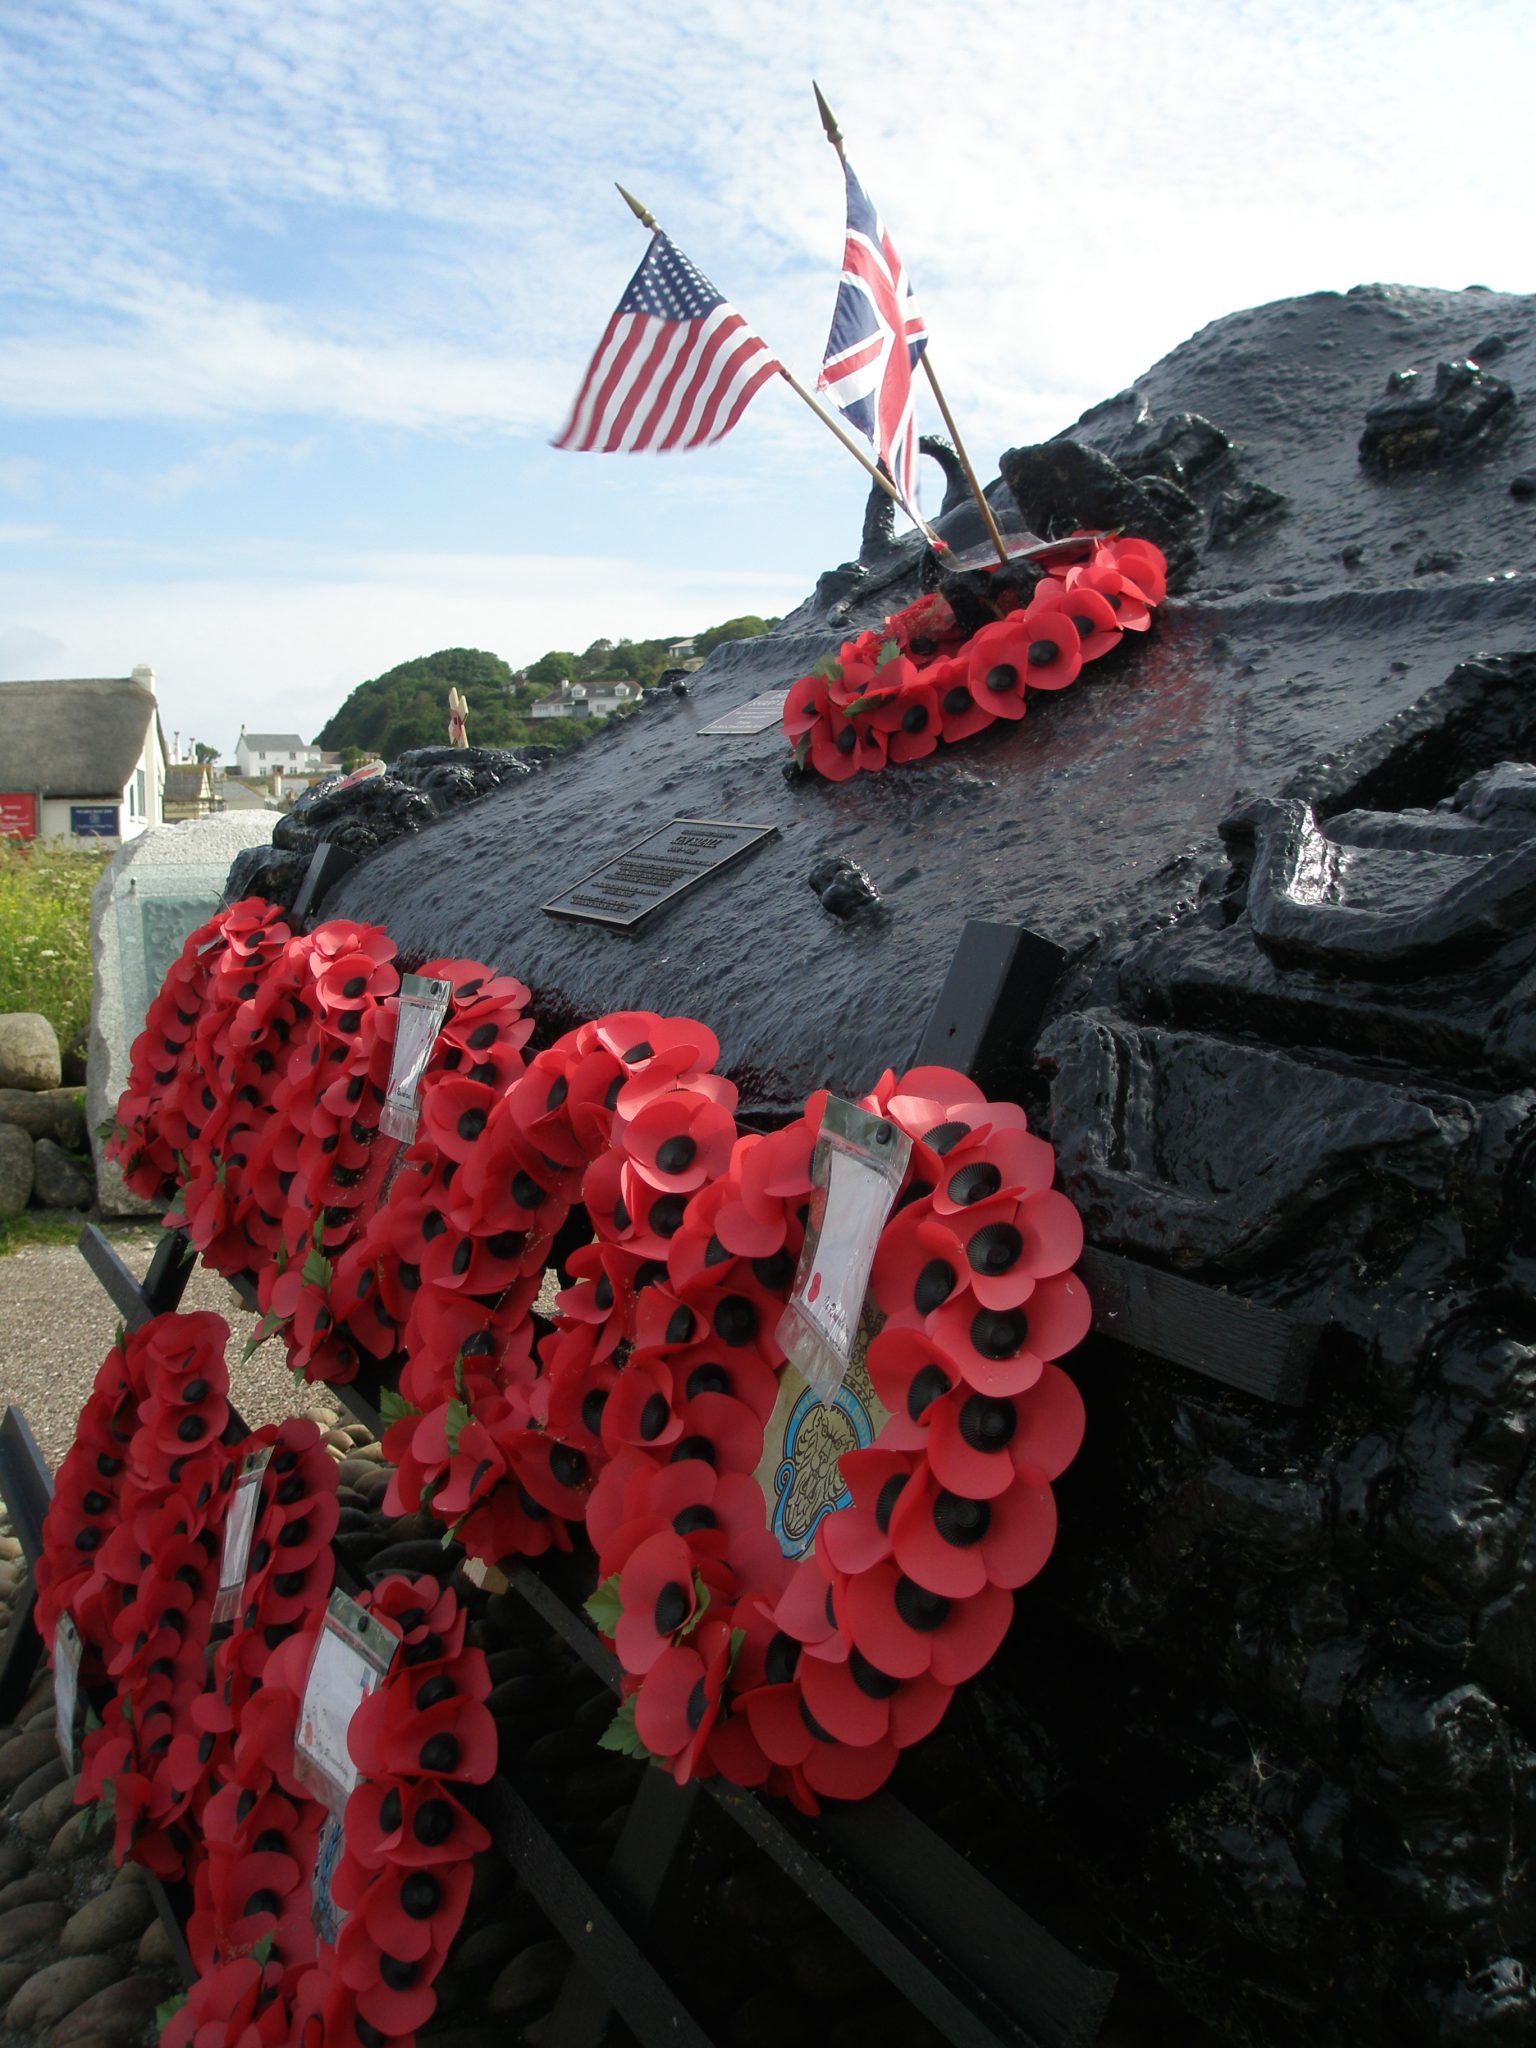 The locals make sure that poppies of remembrance always adorn the Sherman Tank at Torcross